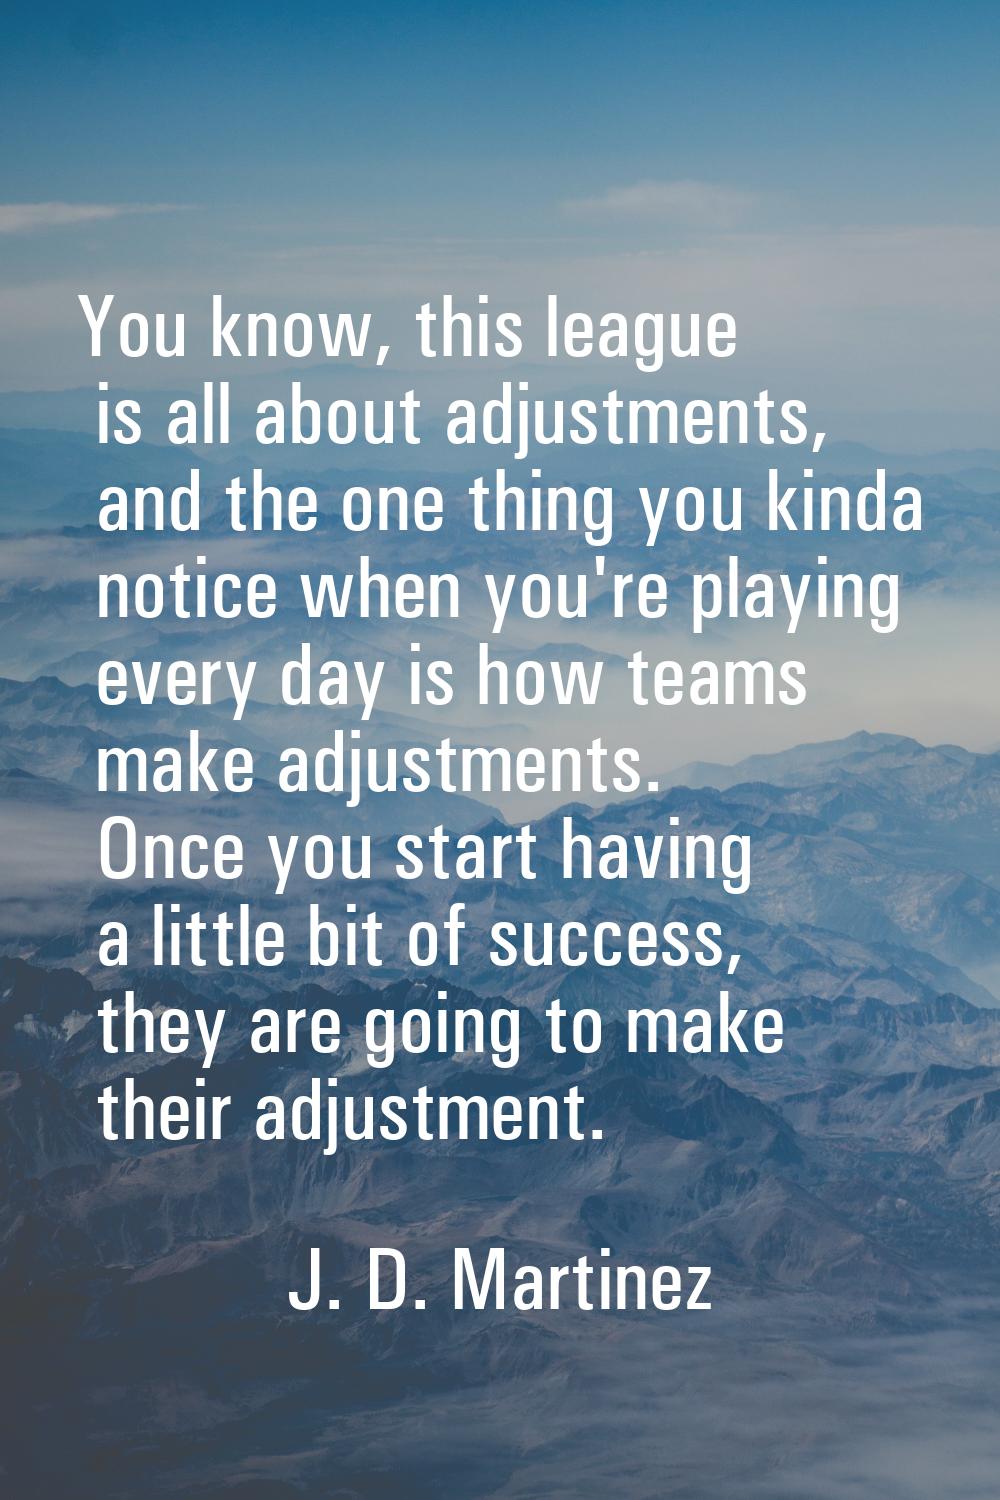 You know, this league is all about adjustments, and the one thing you kinda notice when you're play